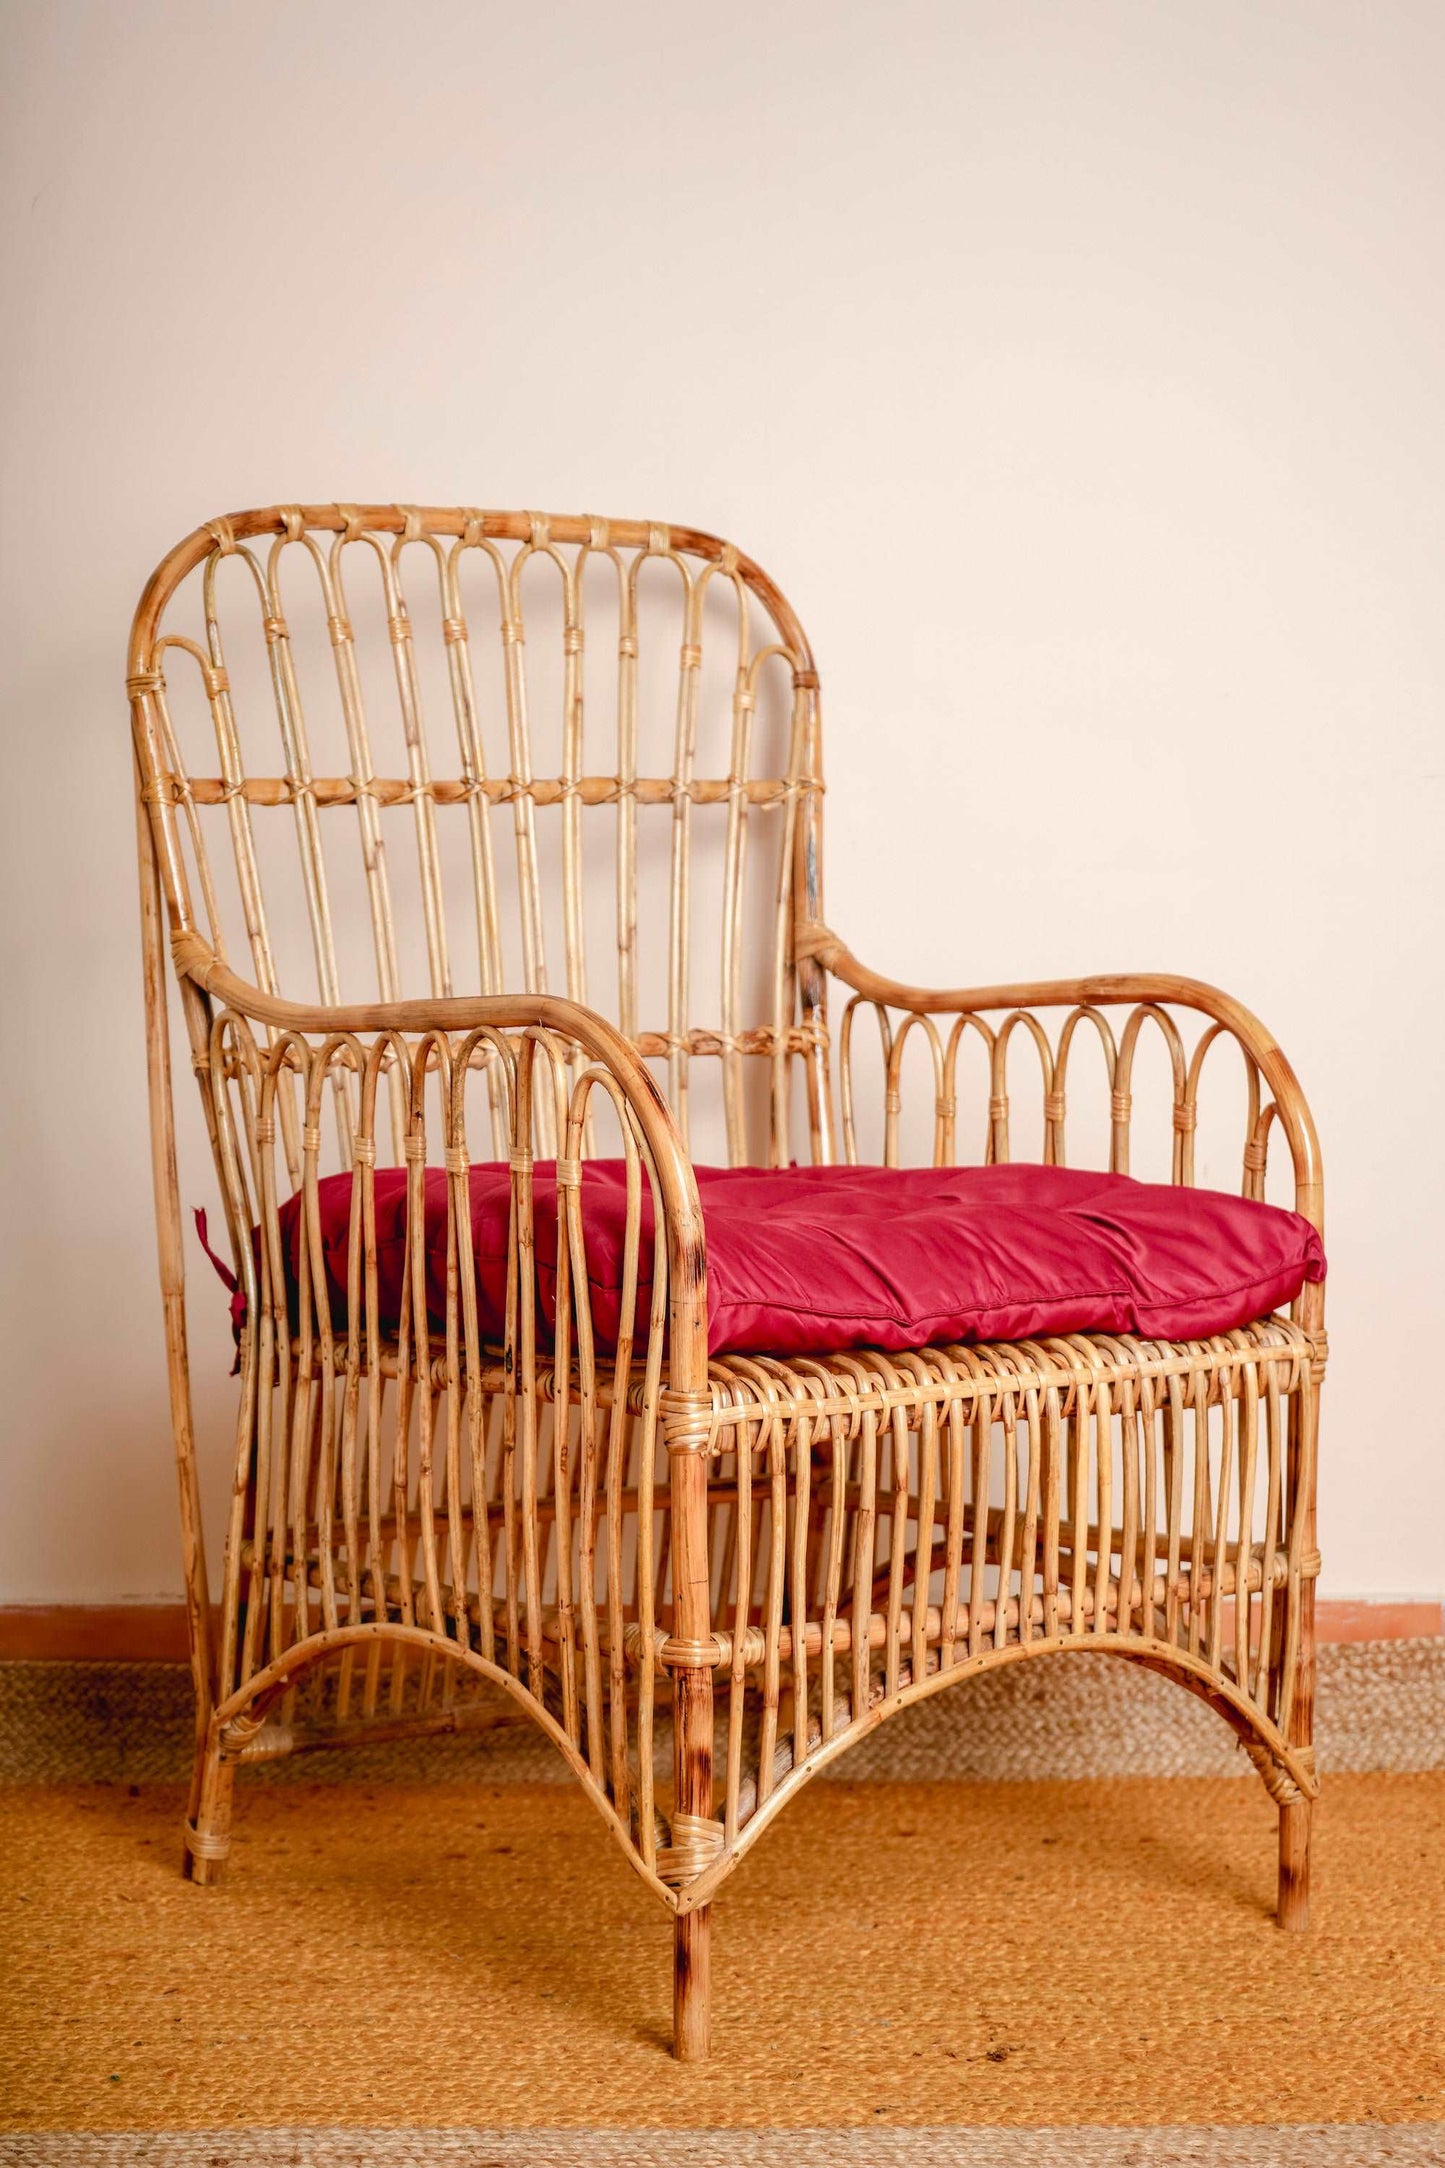 Wicker loop chair with only seat cushion included.